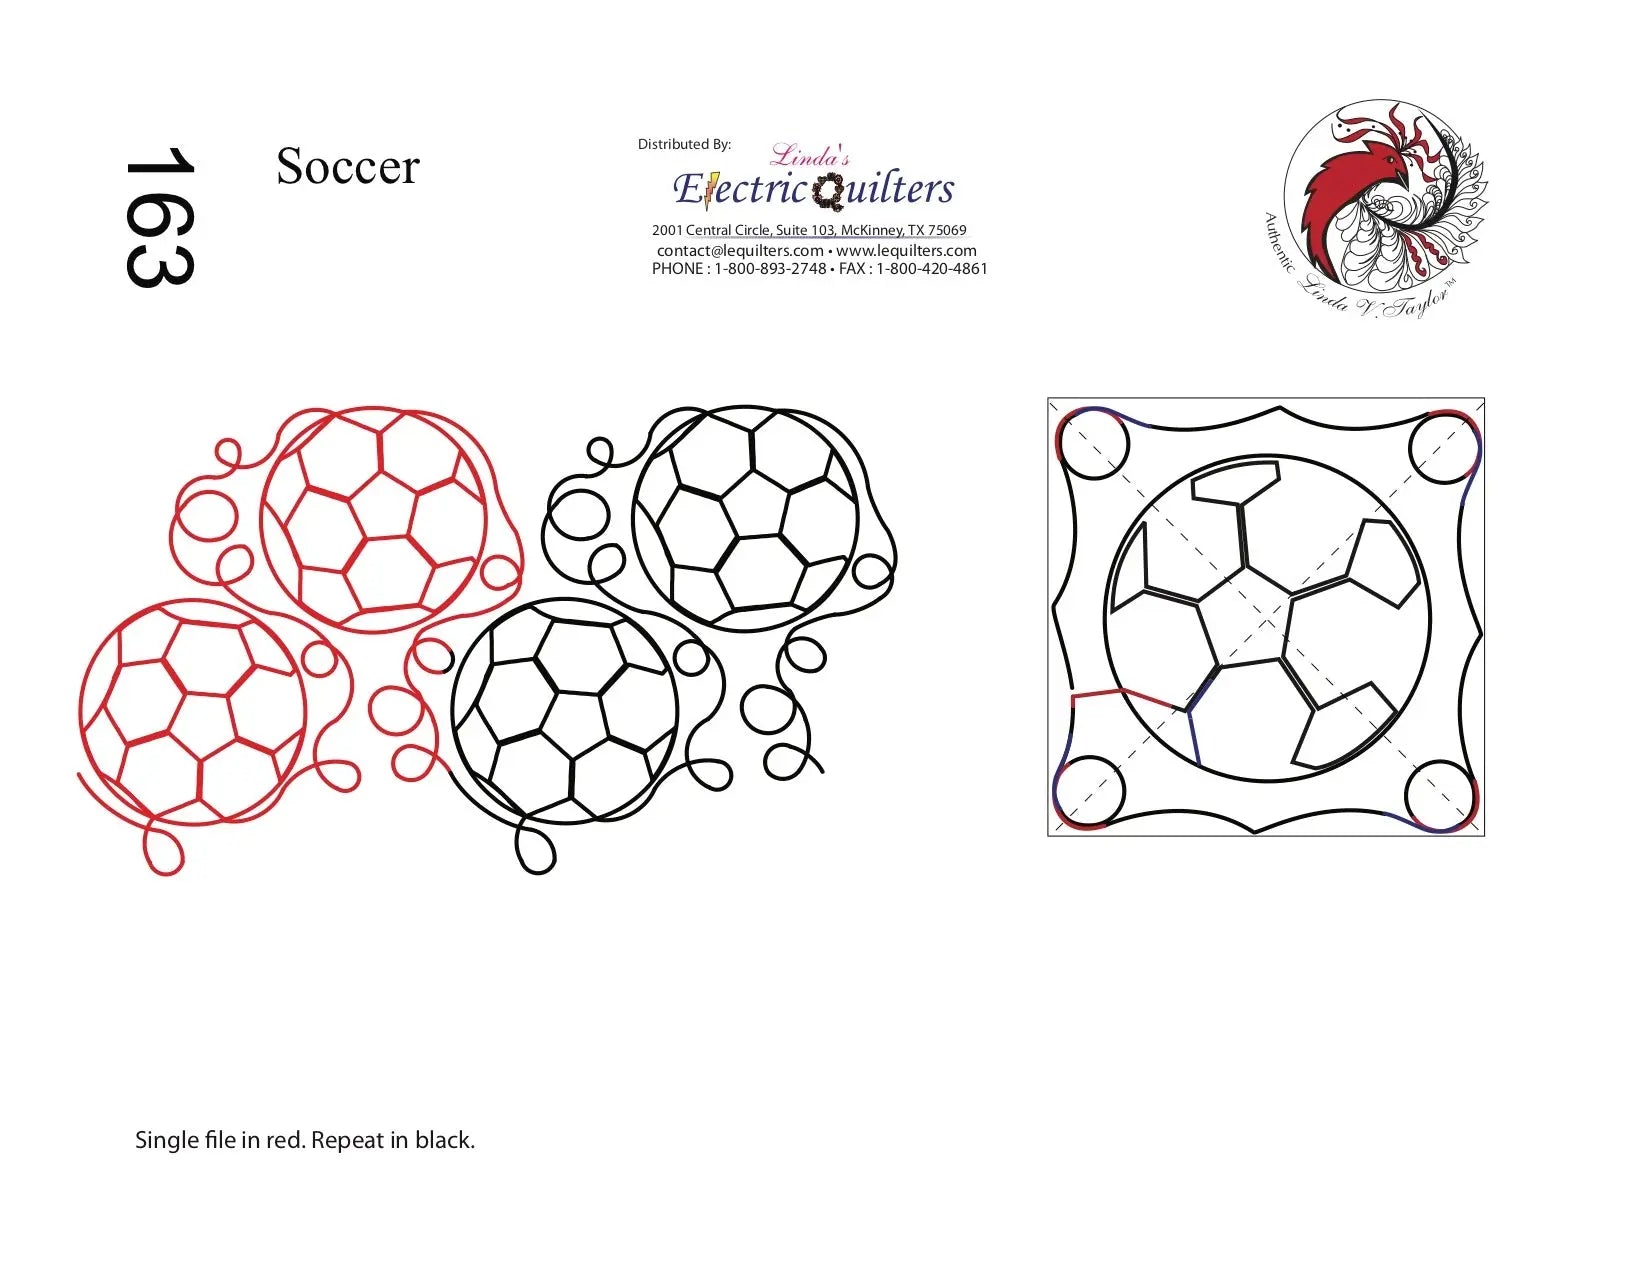 163 Soccer Pantograph with Blocks by Linda V. Taylor - Linda's Electric Quilters